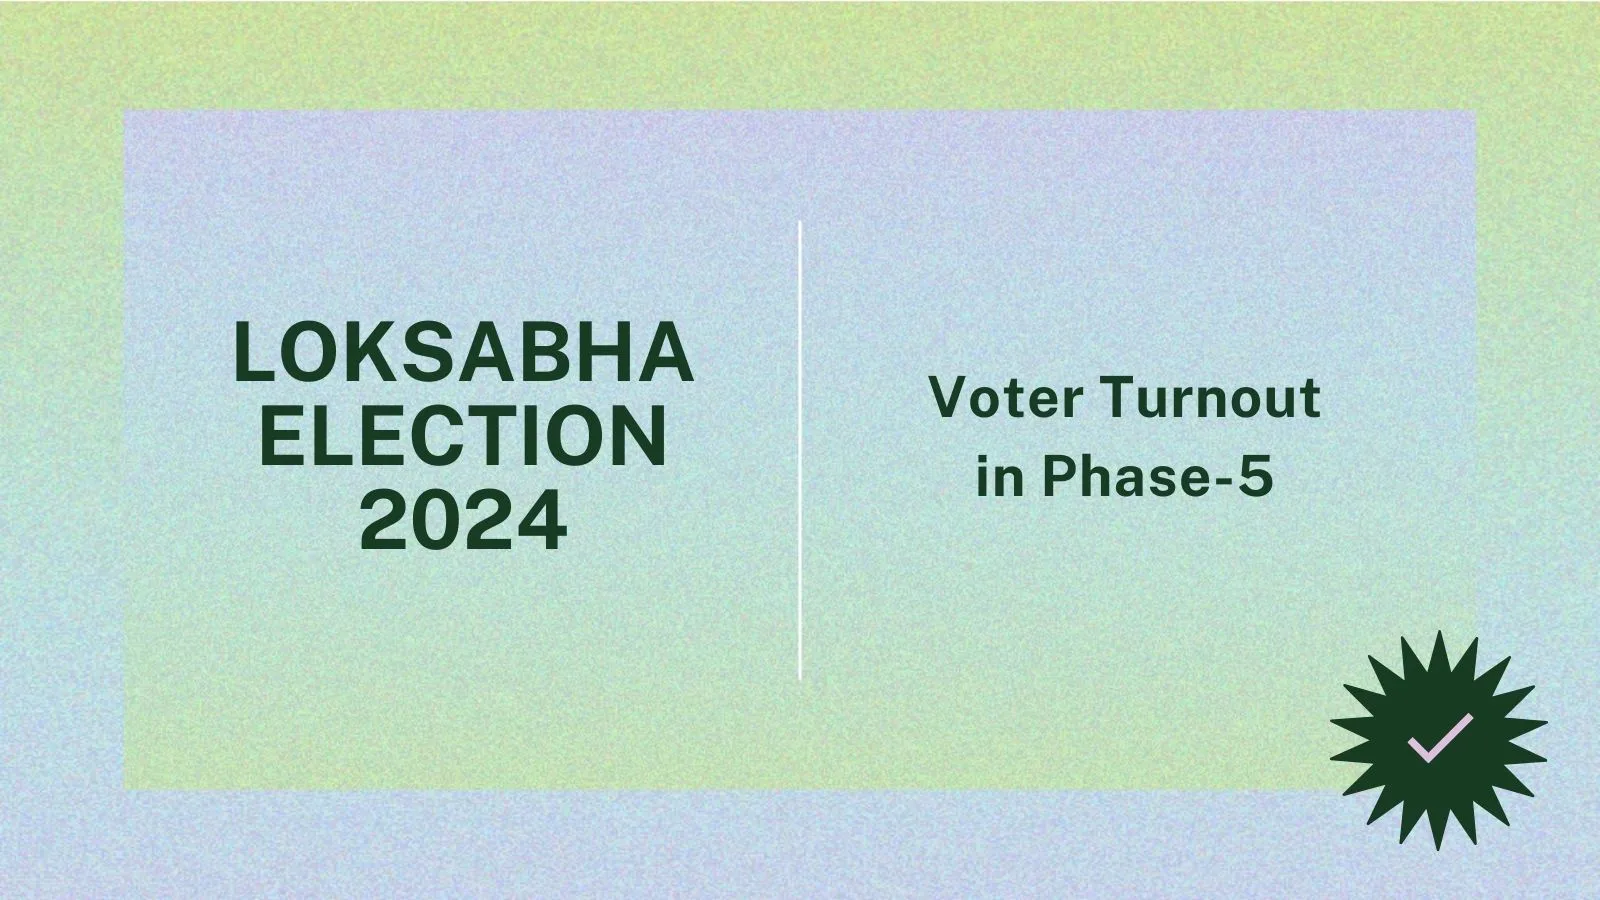 Voter Turnout in Phase-5